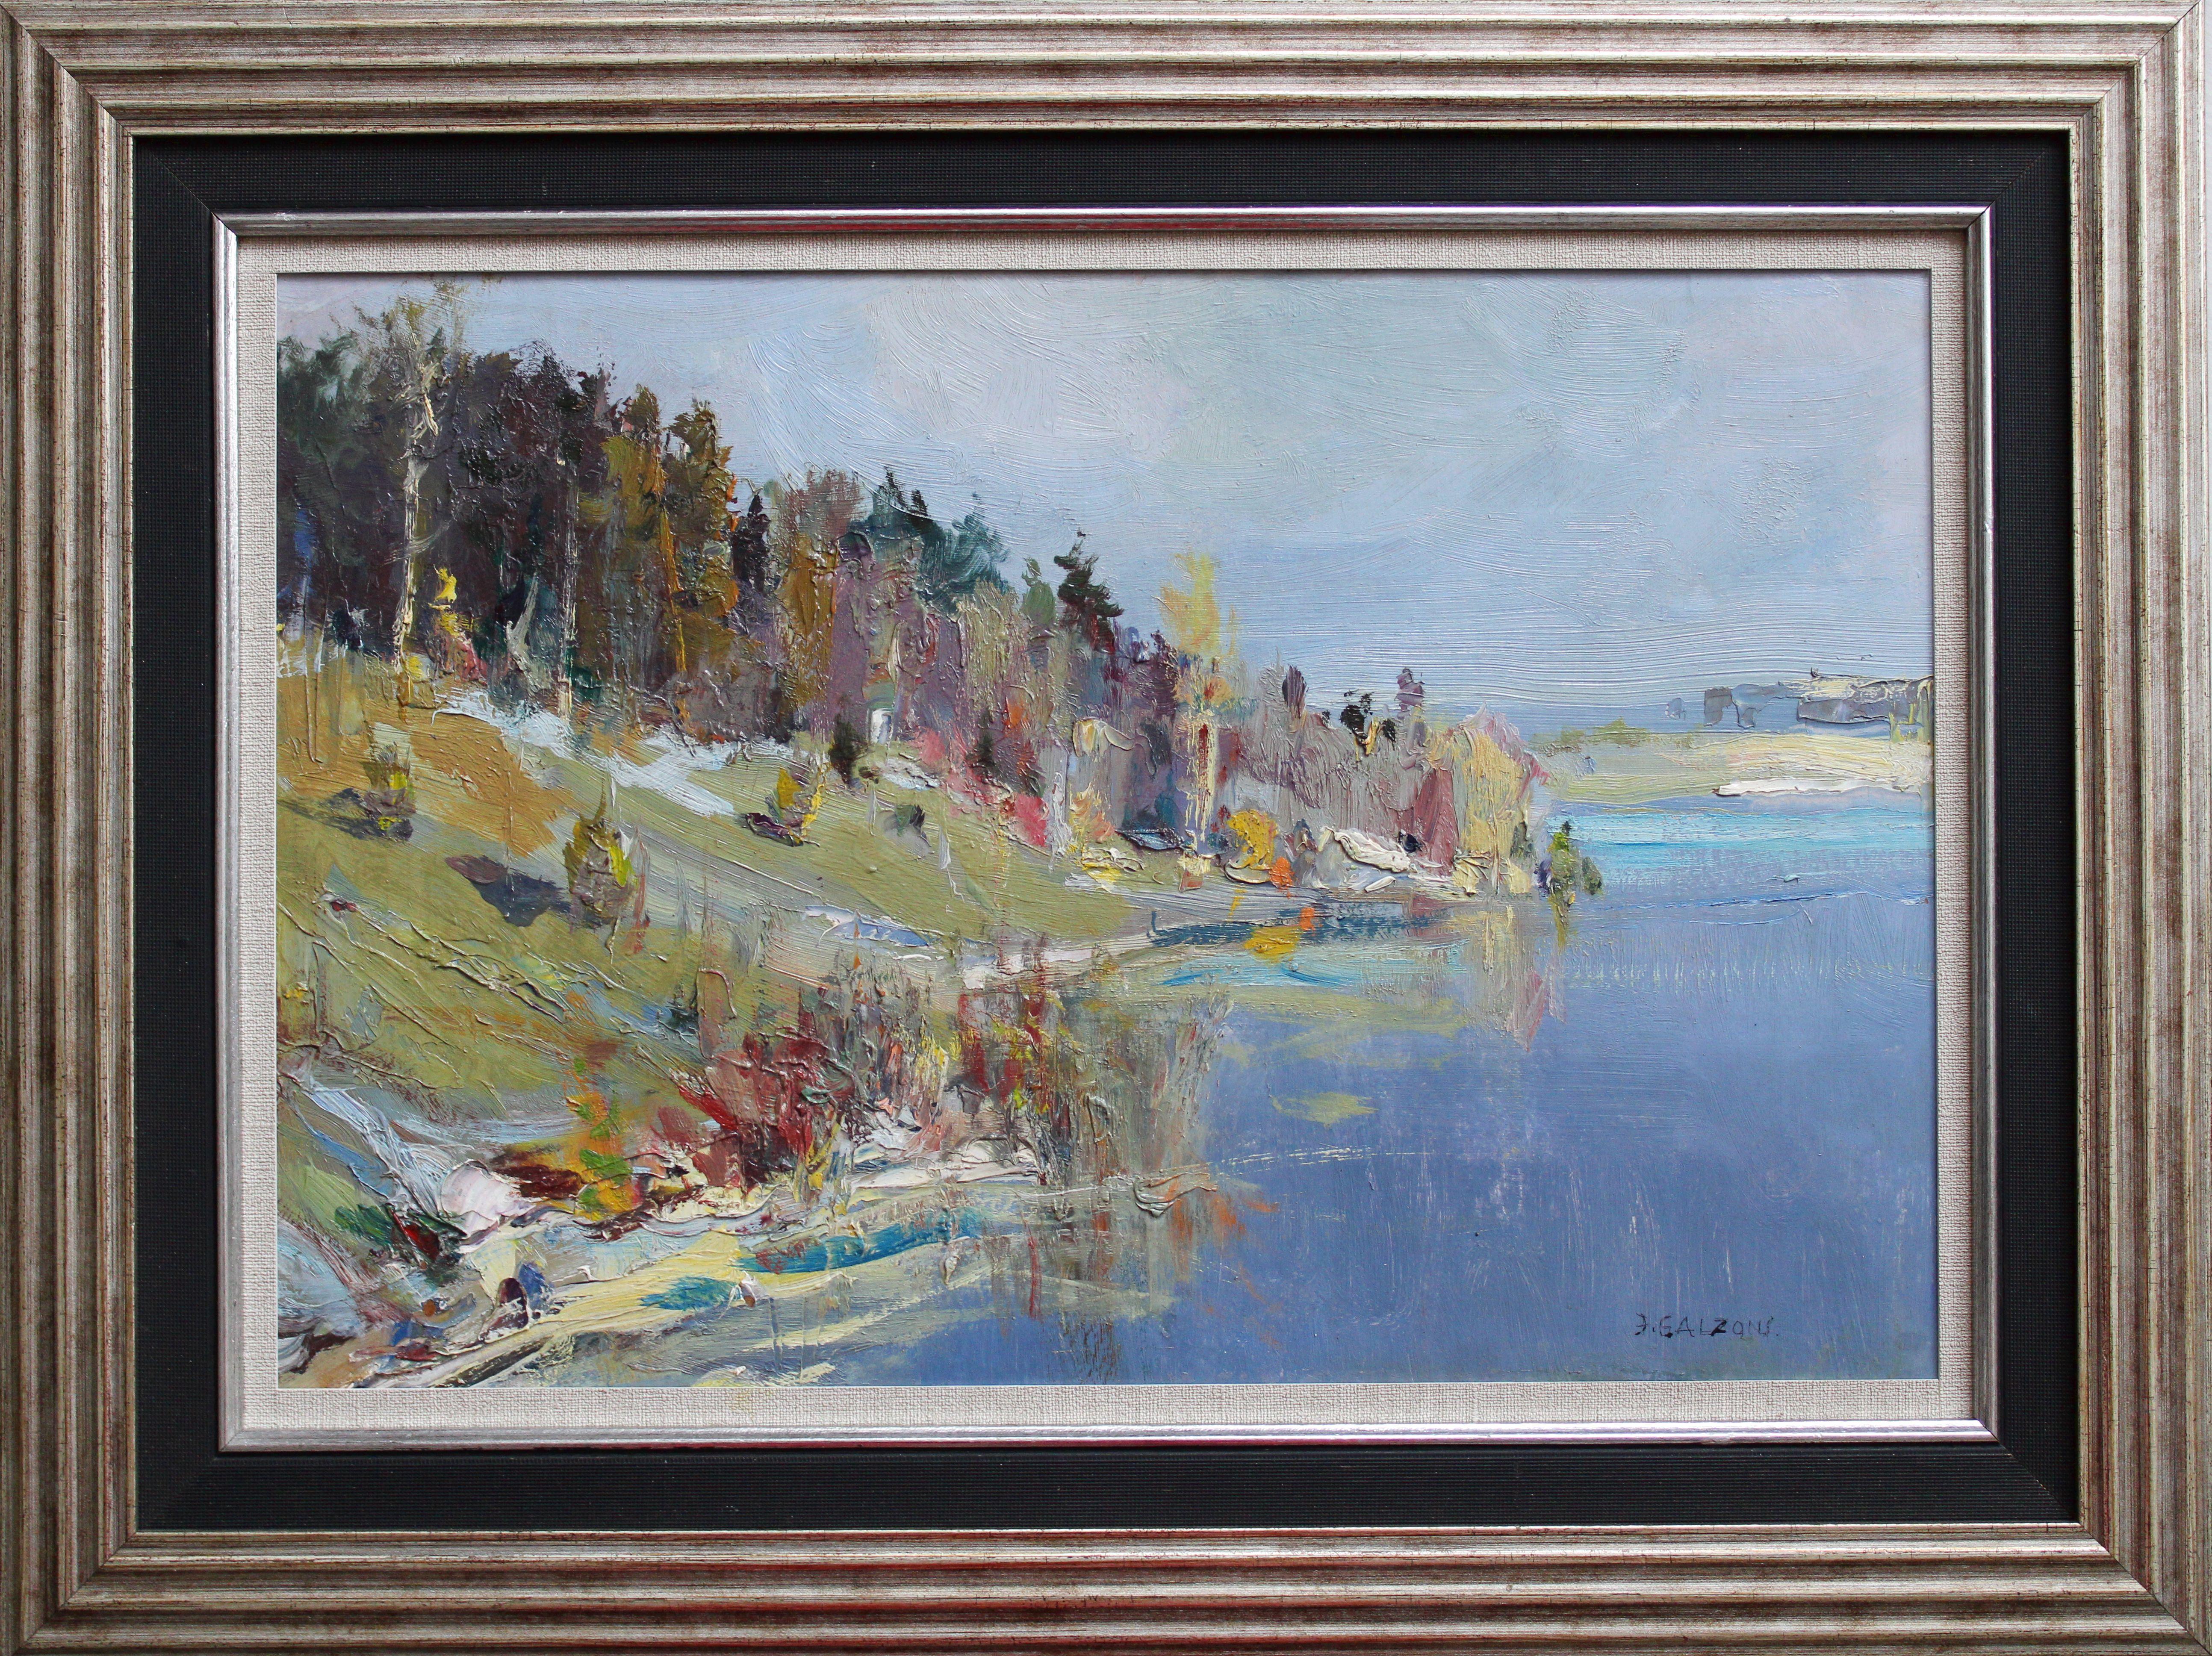 The river in the summer. Cardboard, oil, 32x49 cm - Impressionist Painting by Janis Galzons